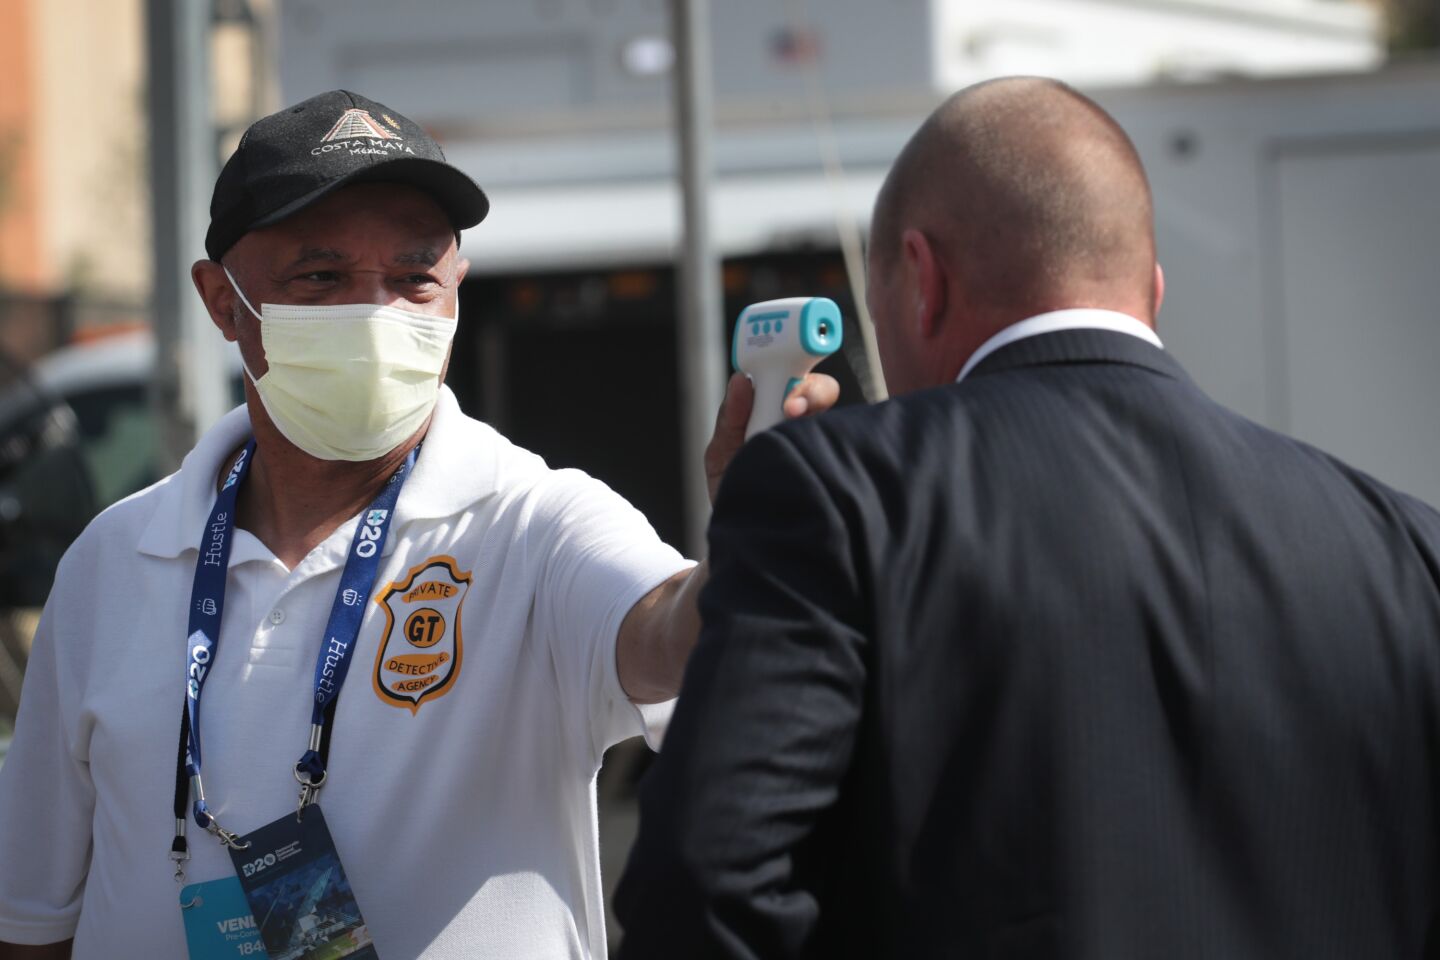 A worker has his temperature taken before entering the security perimeter outside the Wisconsin Center, where the Democratic National Convention began Monday in Milwaukee.